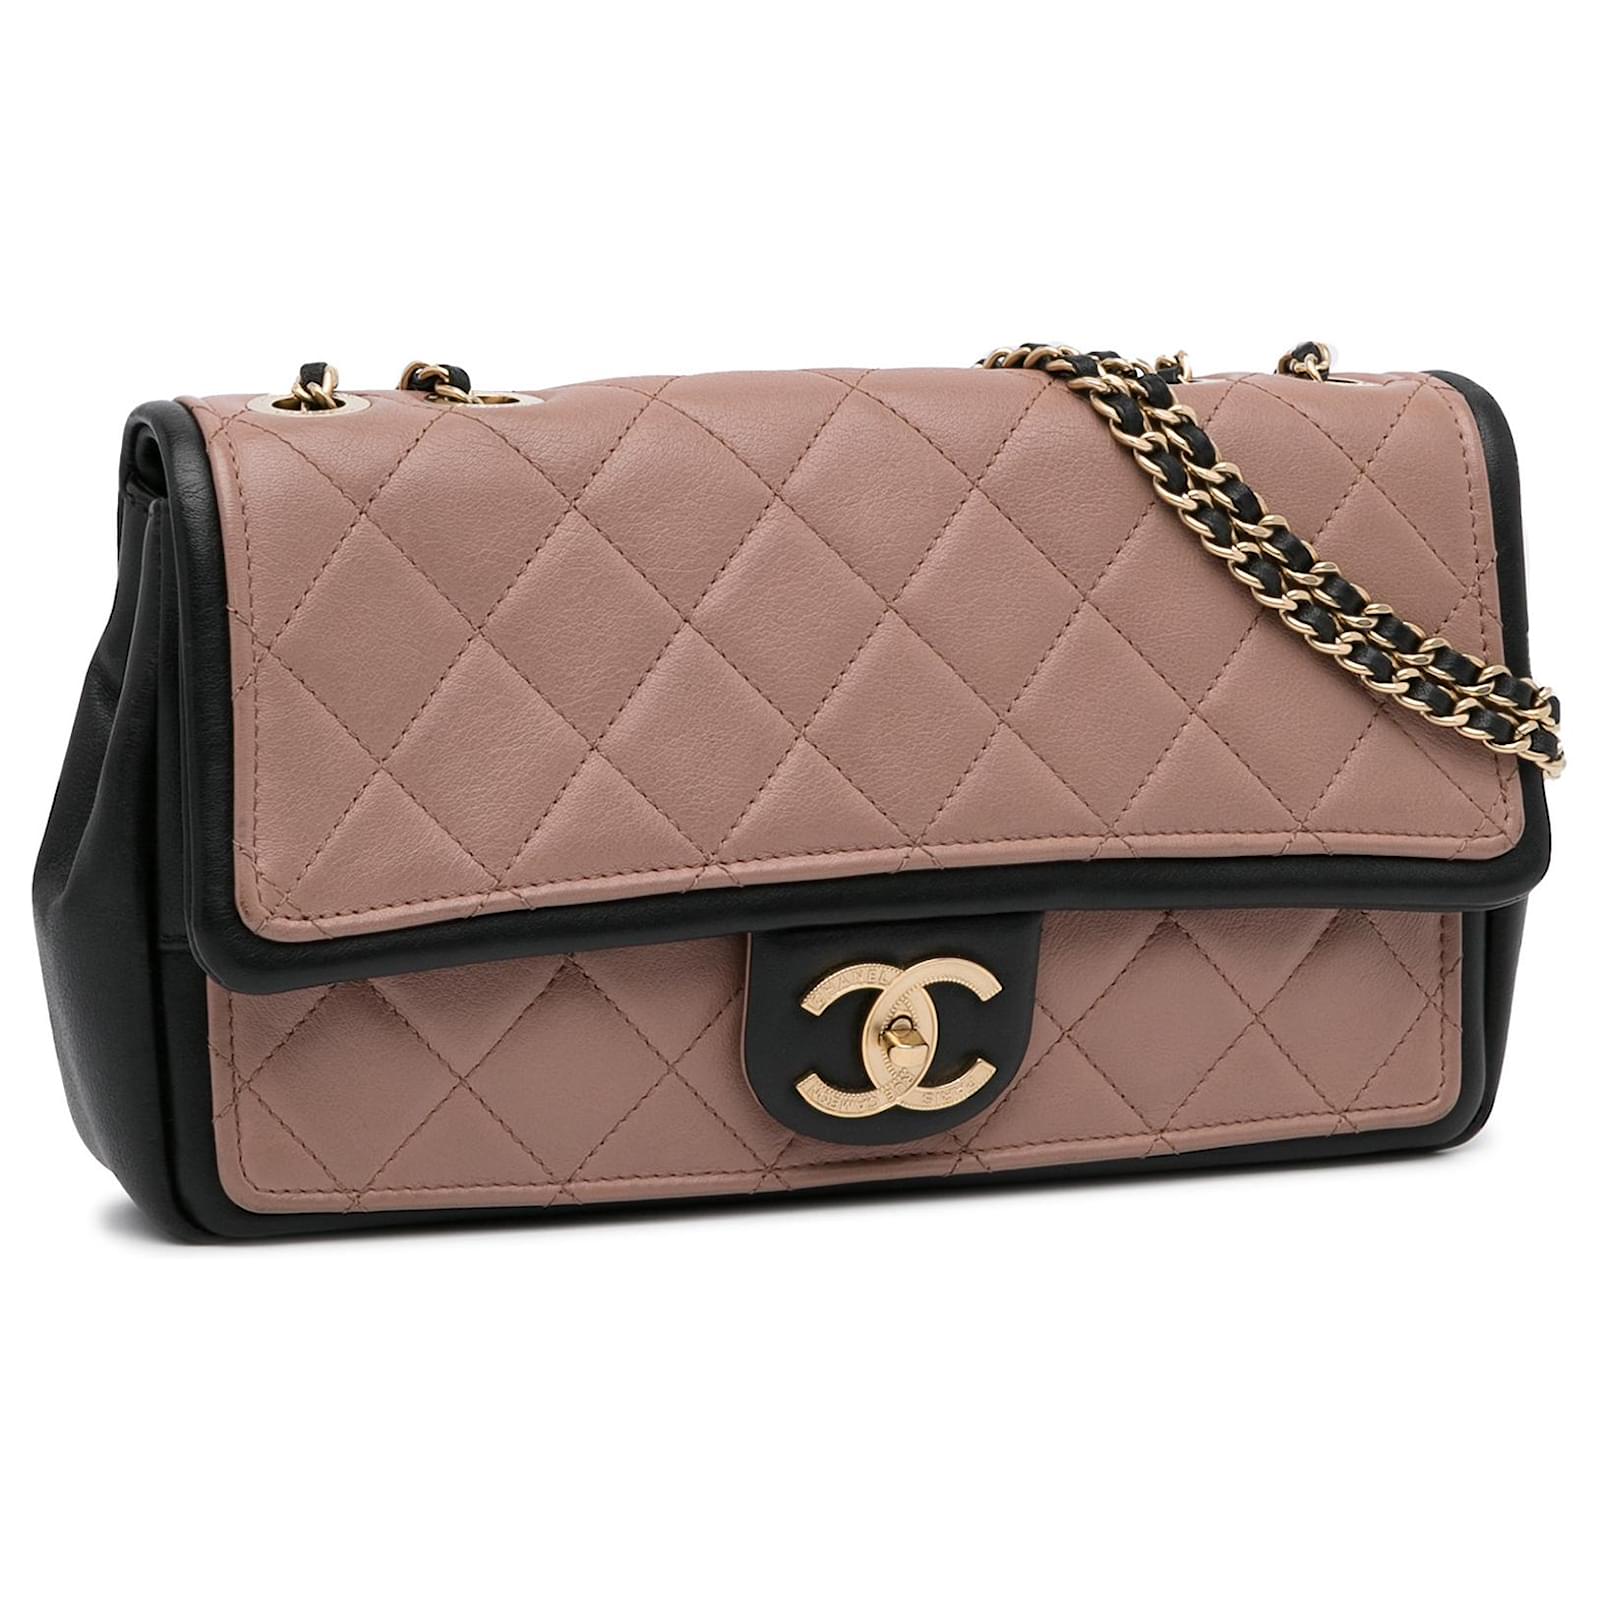 Chanel White/Black Quilted Leather Medium Graphic Flap Bag